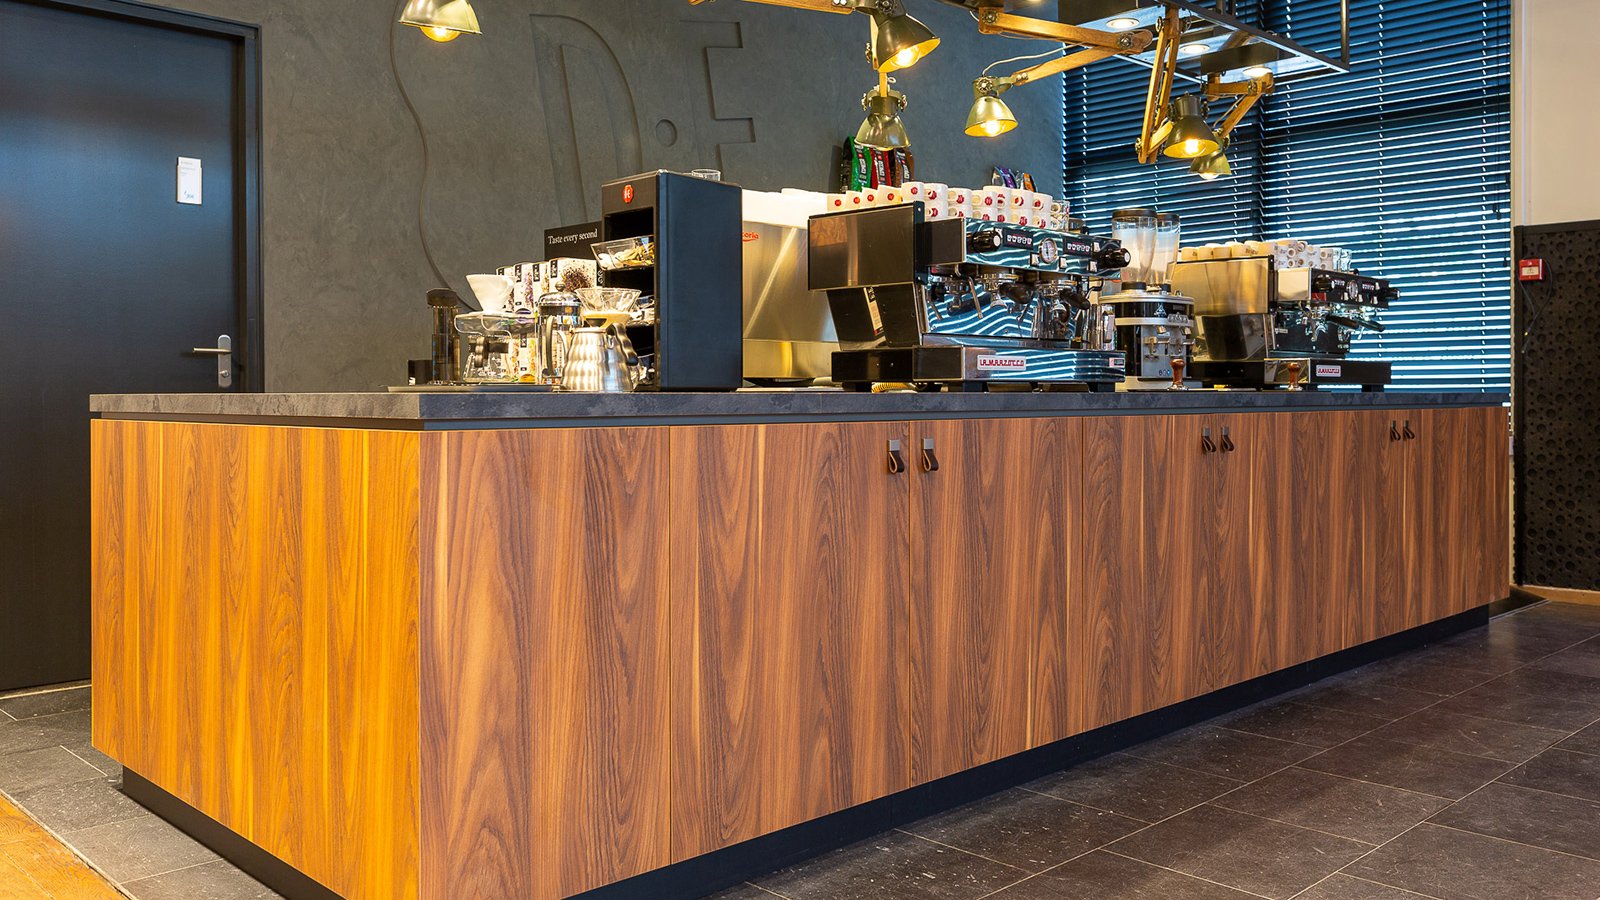 The bar that invites you to be a barista